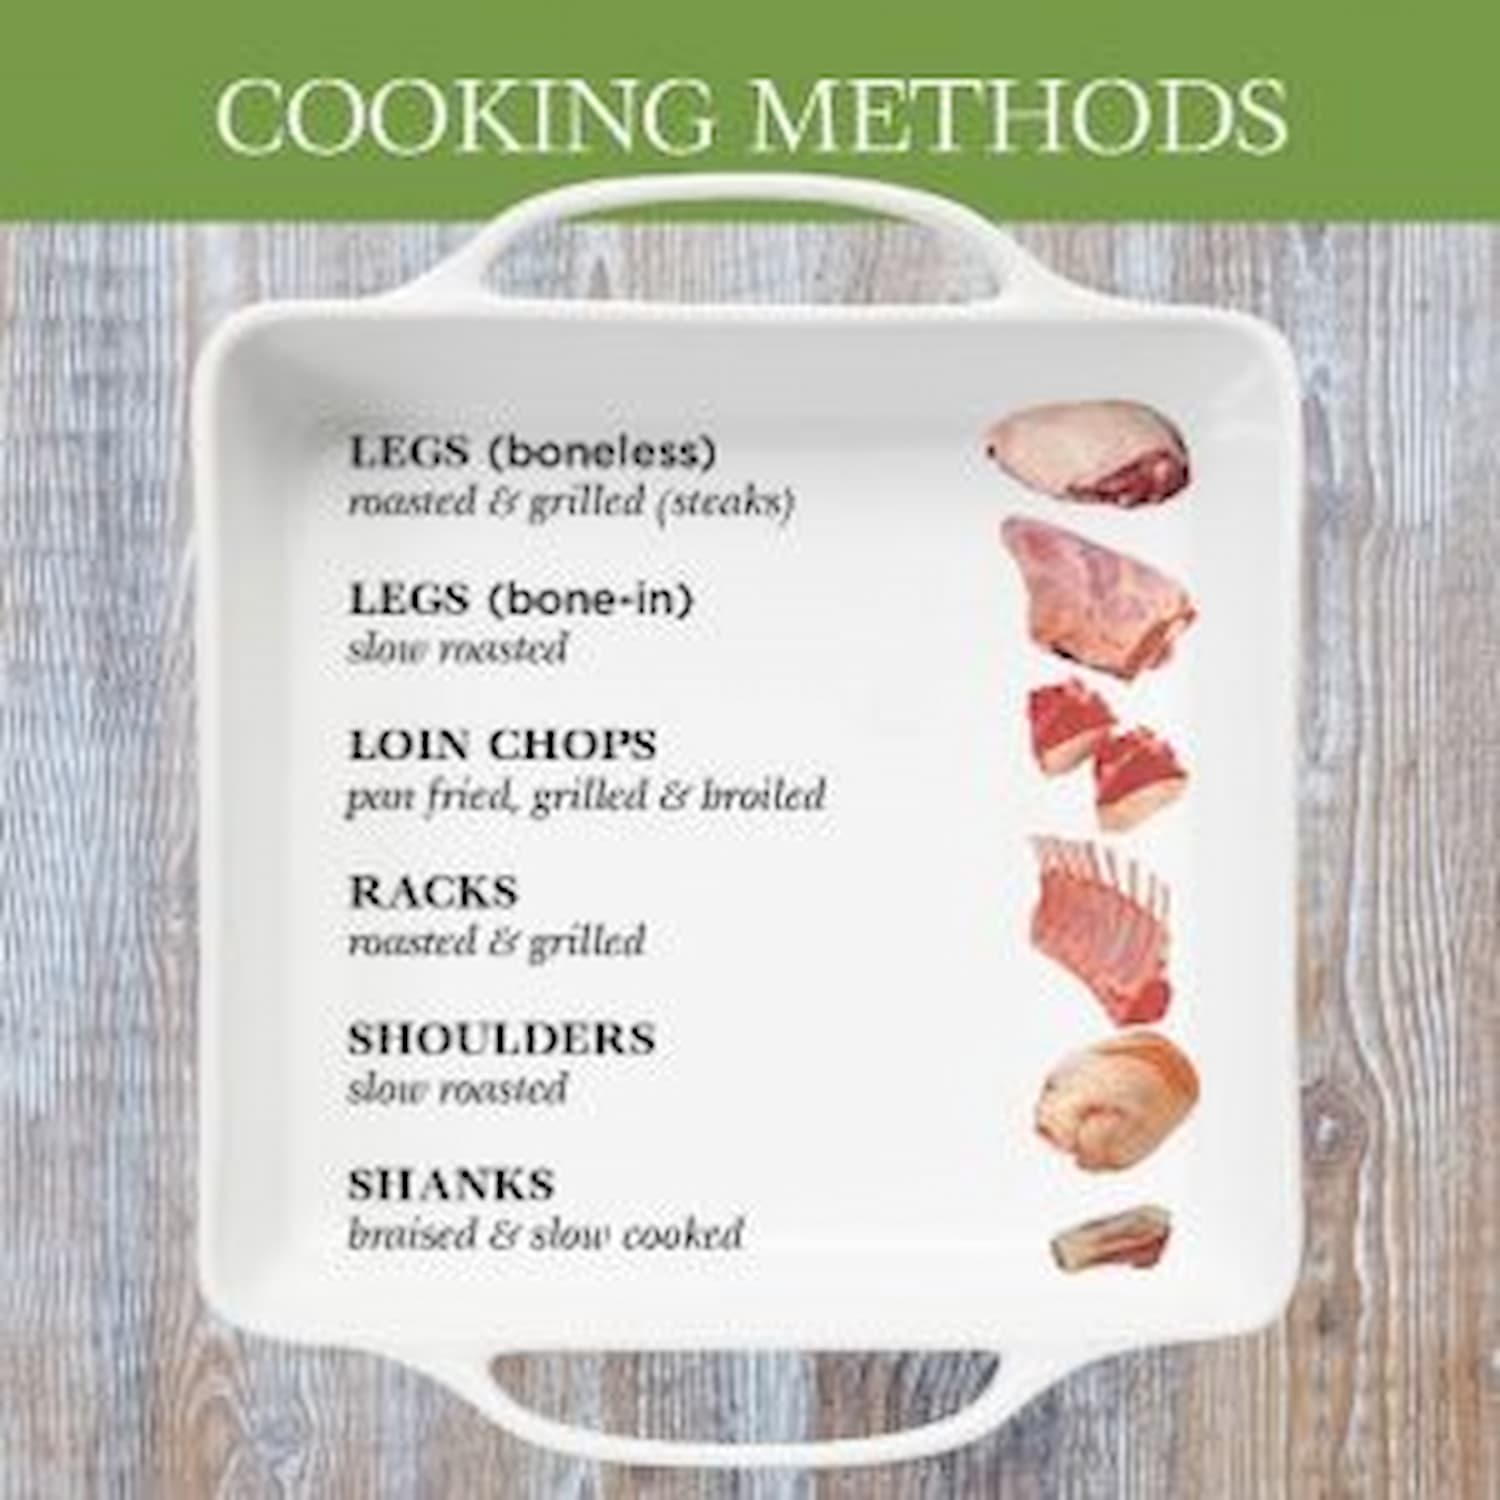 Healthy cooking techniques for lamb meat